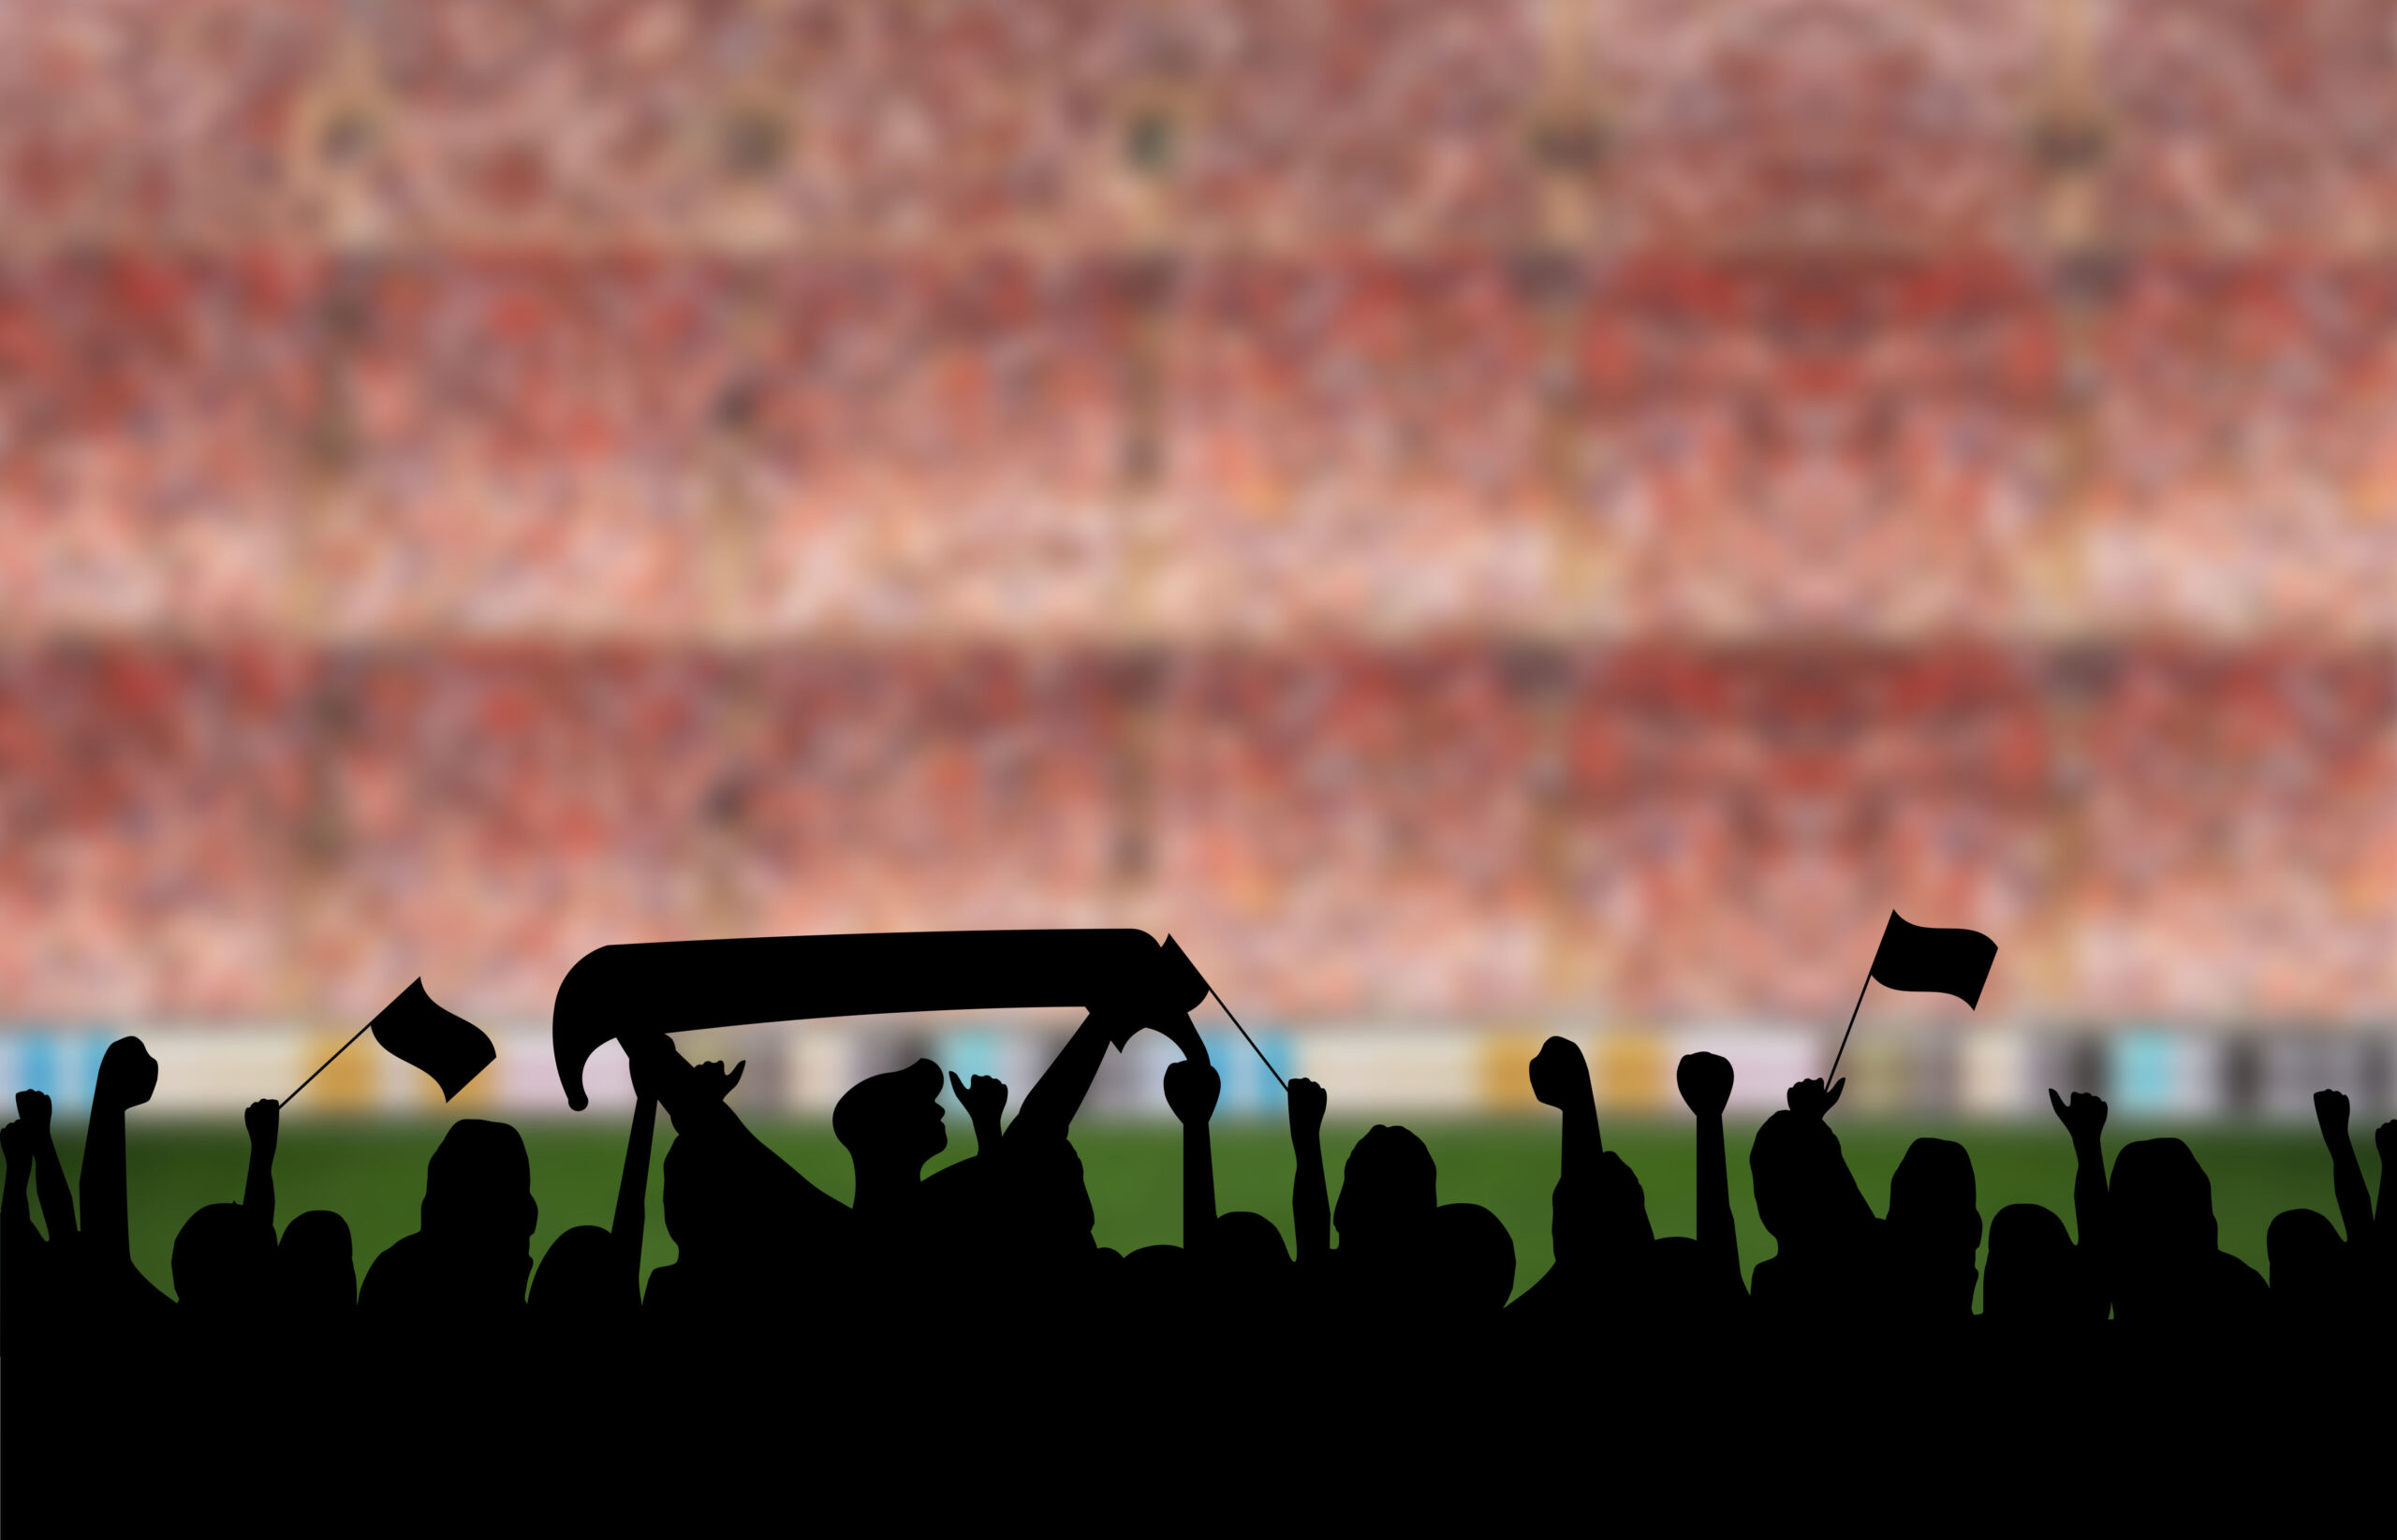 An Illustration Of A Cheering Audience During A Soccer Match In A Stadium